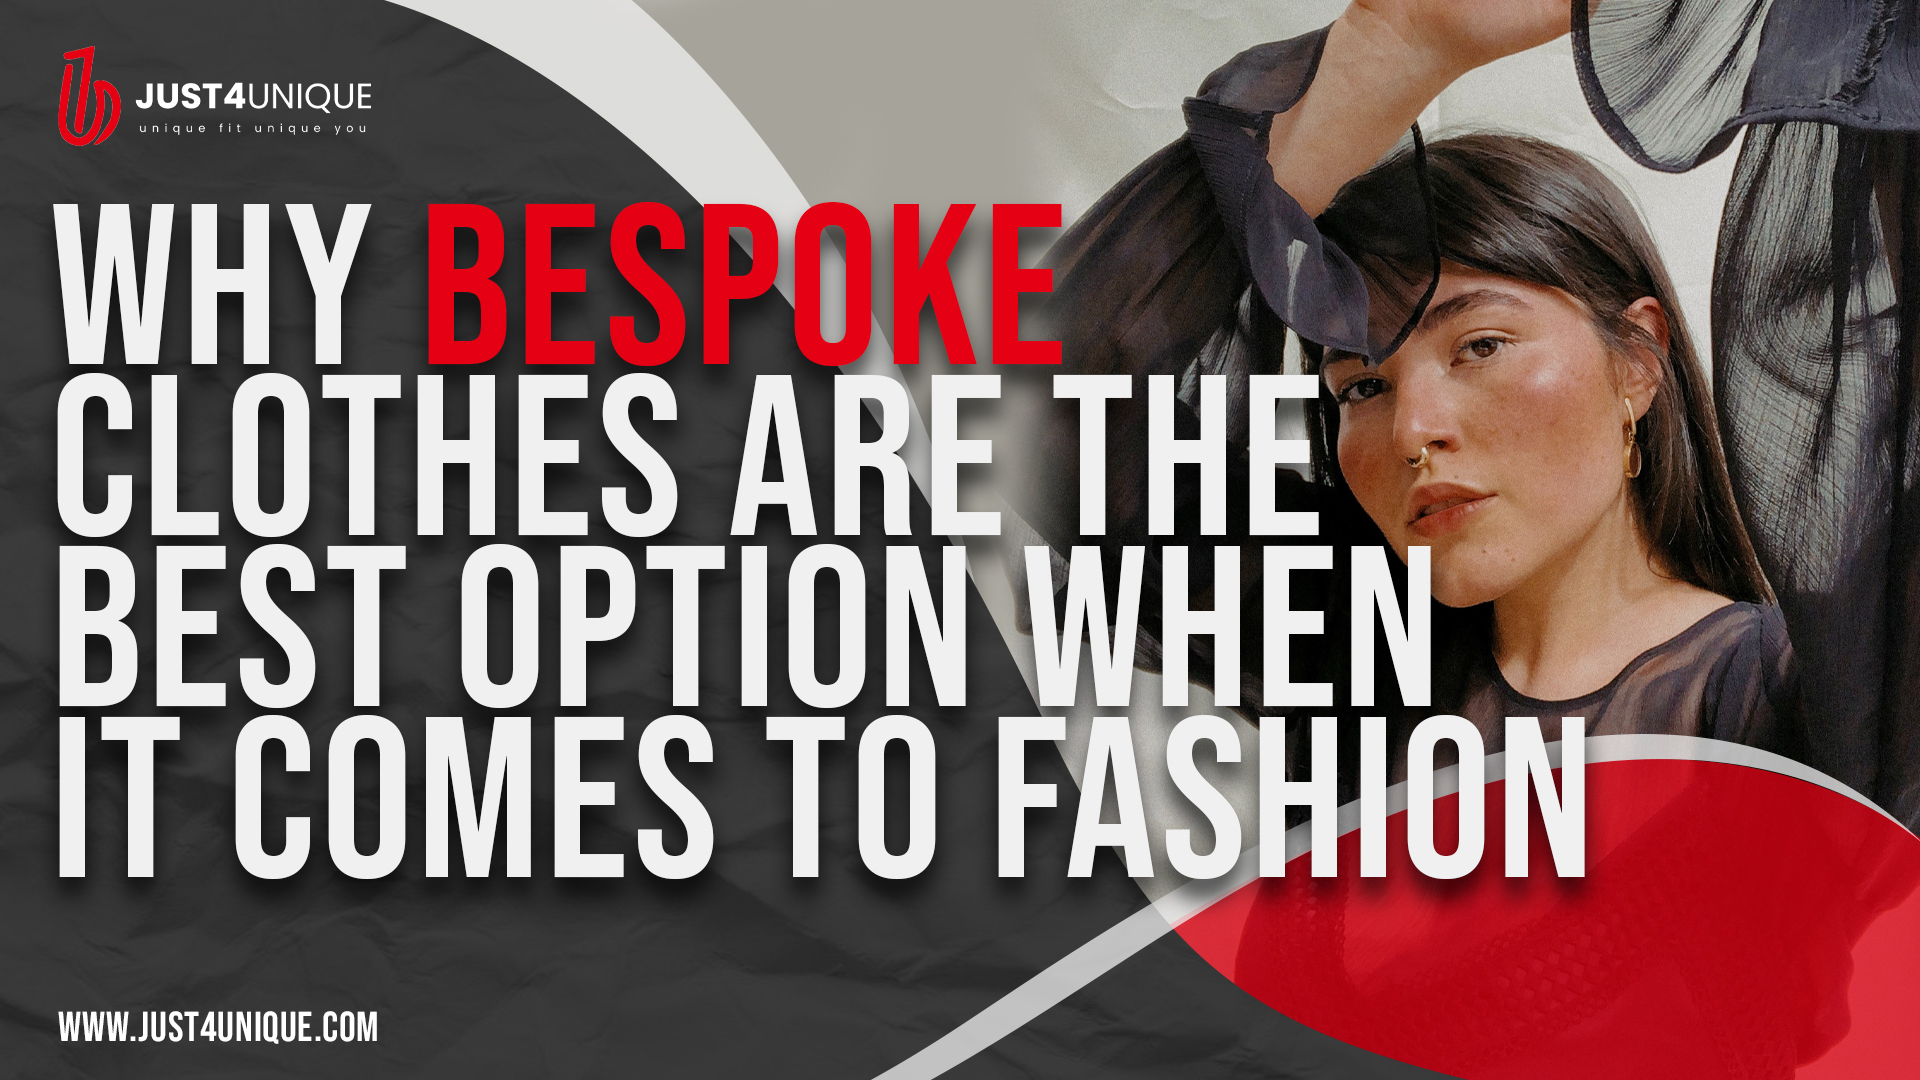 Why Bespoke Clothes are the Best Option When it Comes to Fashion